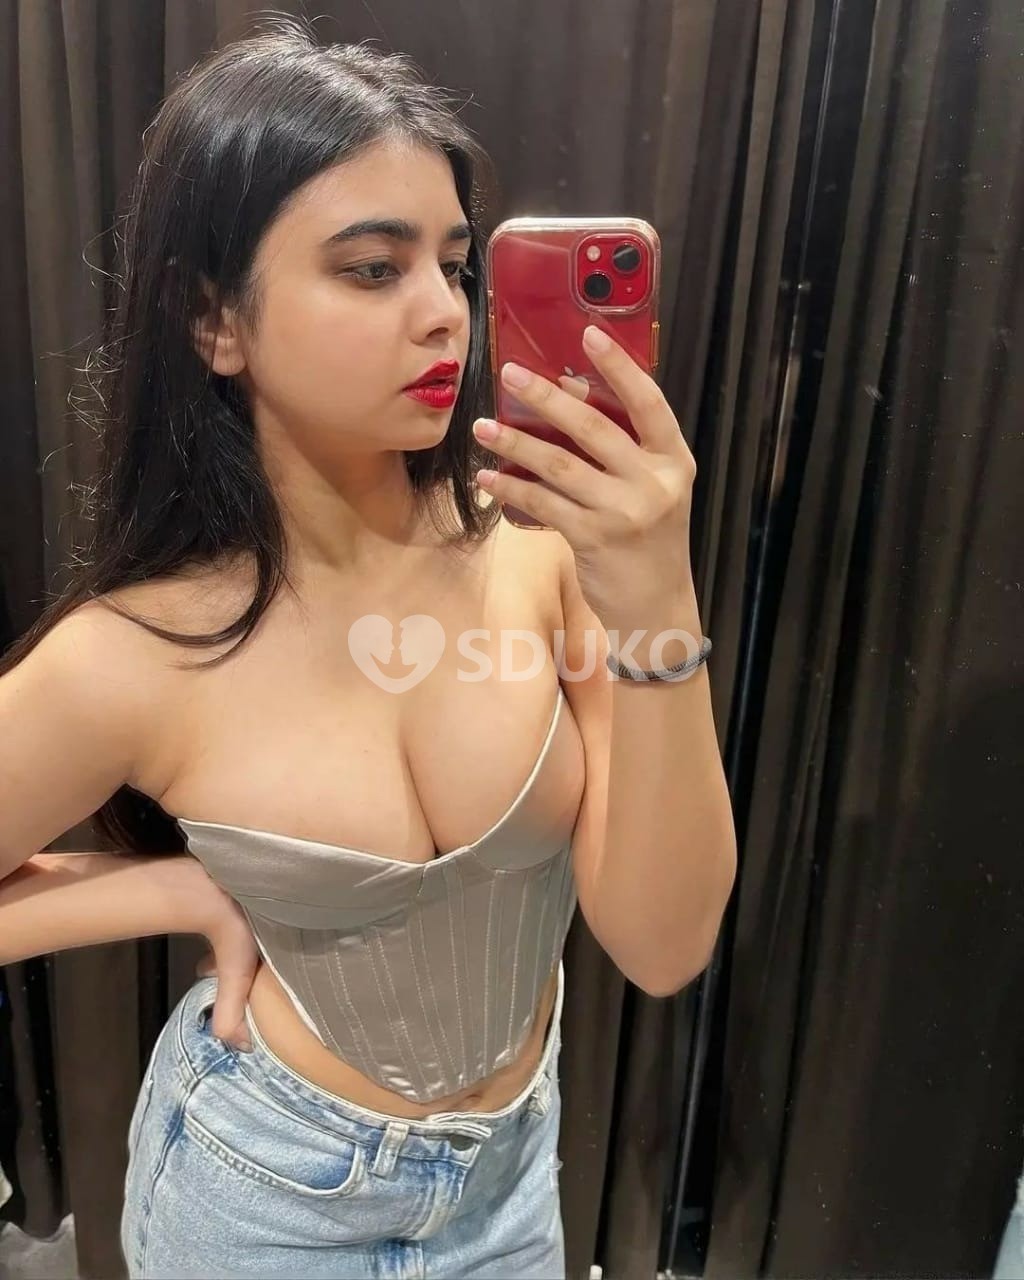 Nehru place❤️24x7 AFFORDABLE CHEAPEST RATE SAFE CALL GIRL SERVICE..